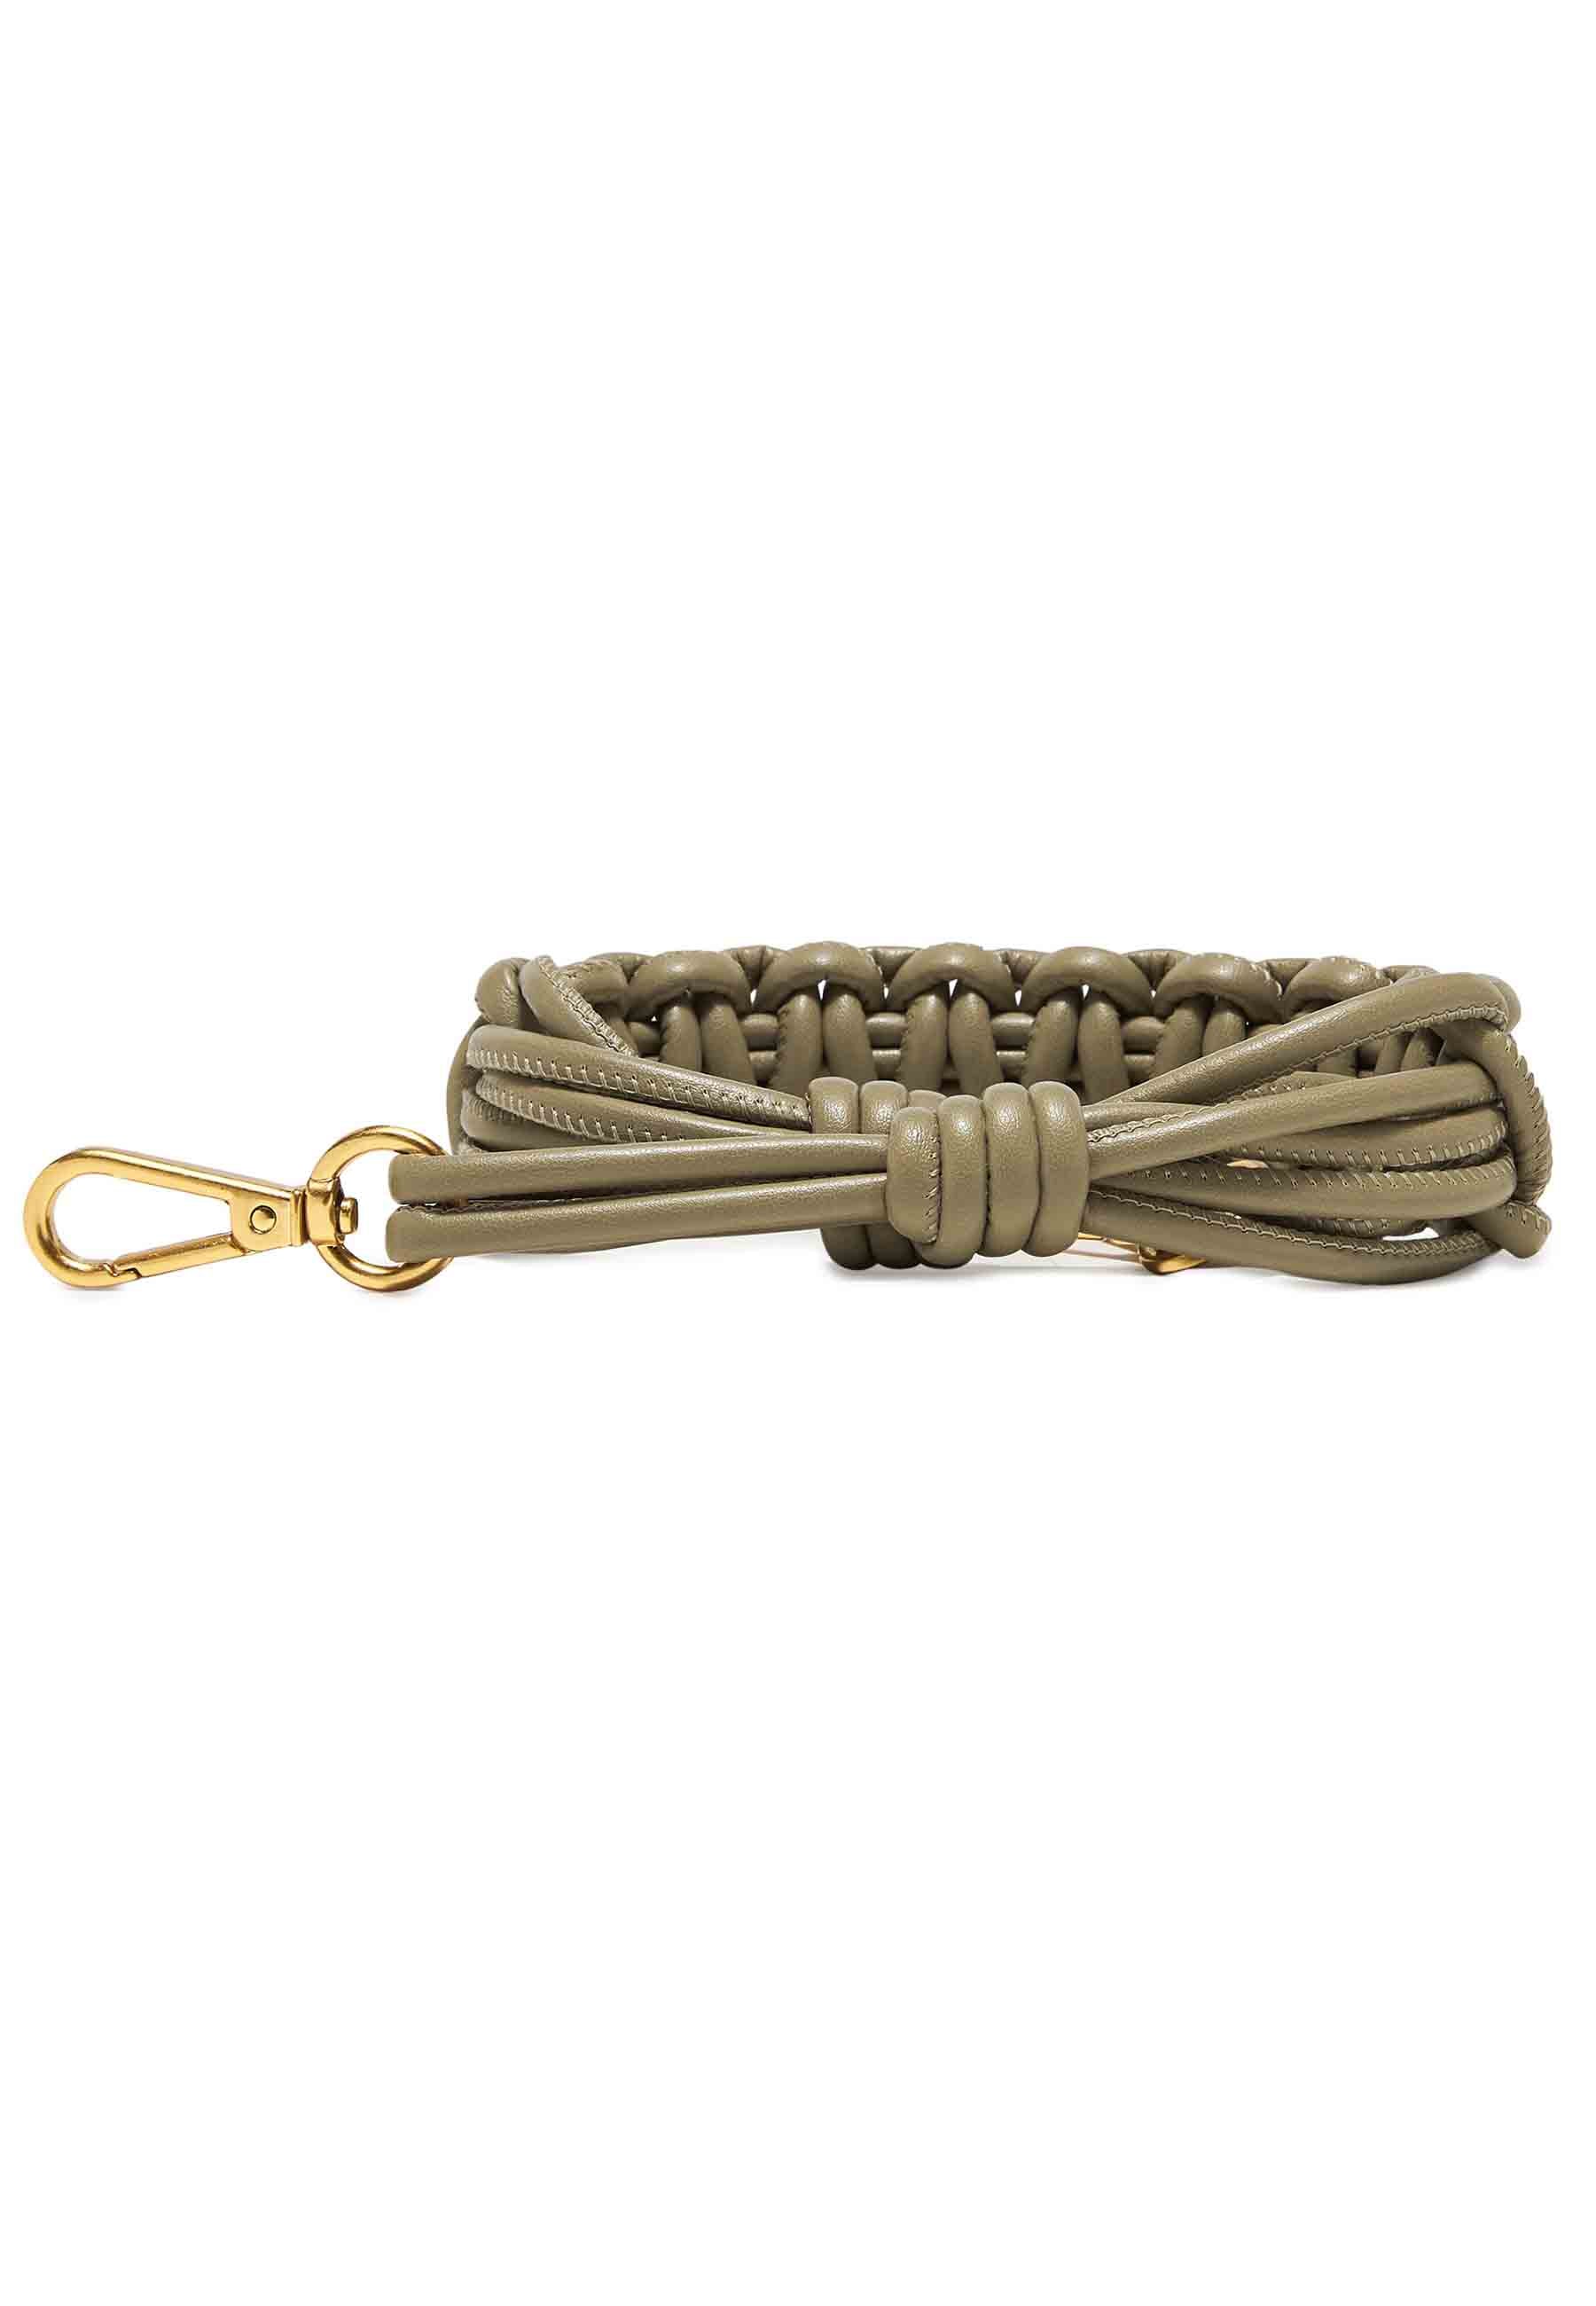 Green woven leather shoulder strap with gold-coloured hooks